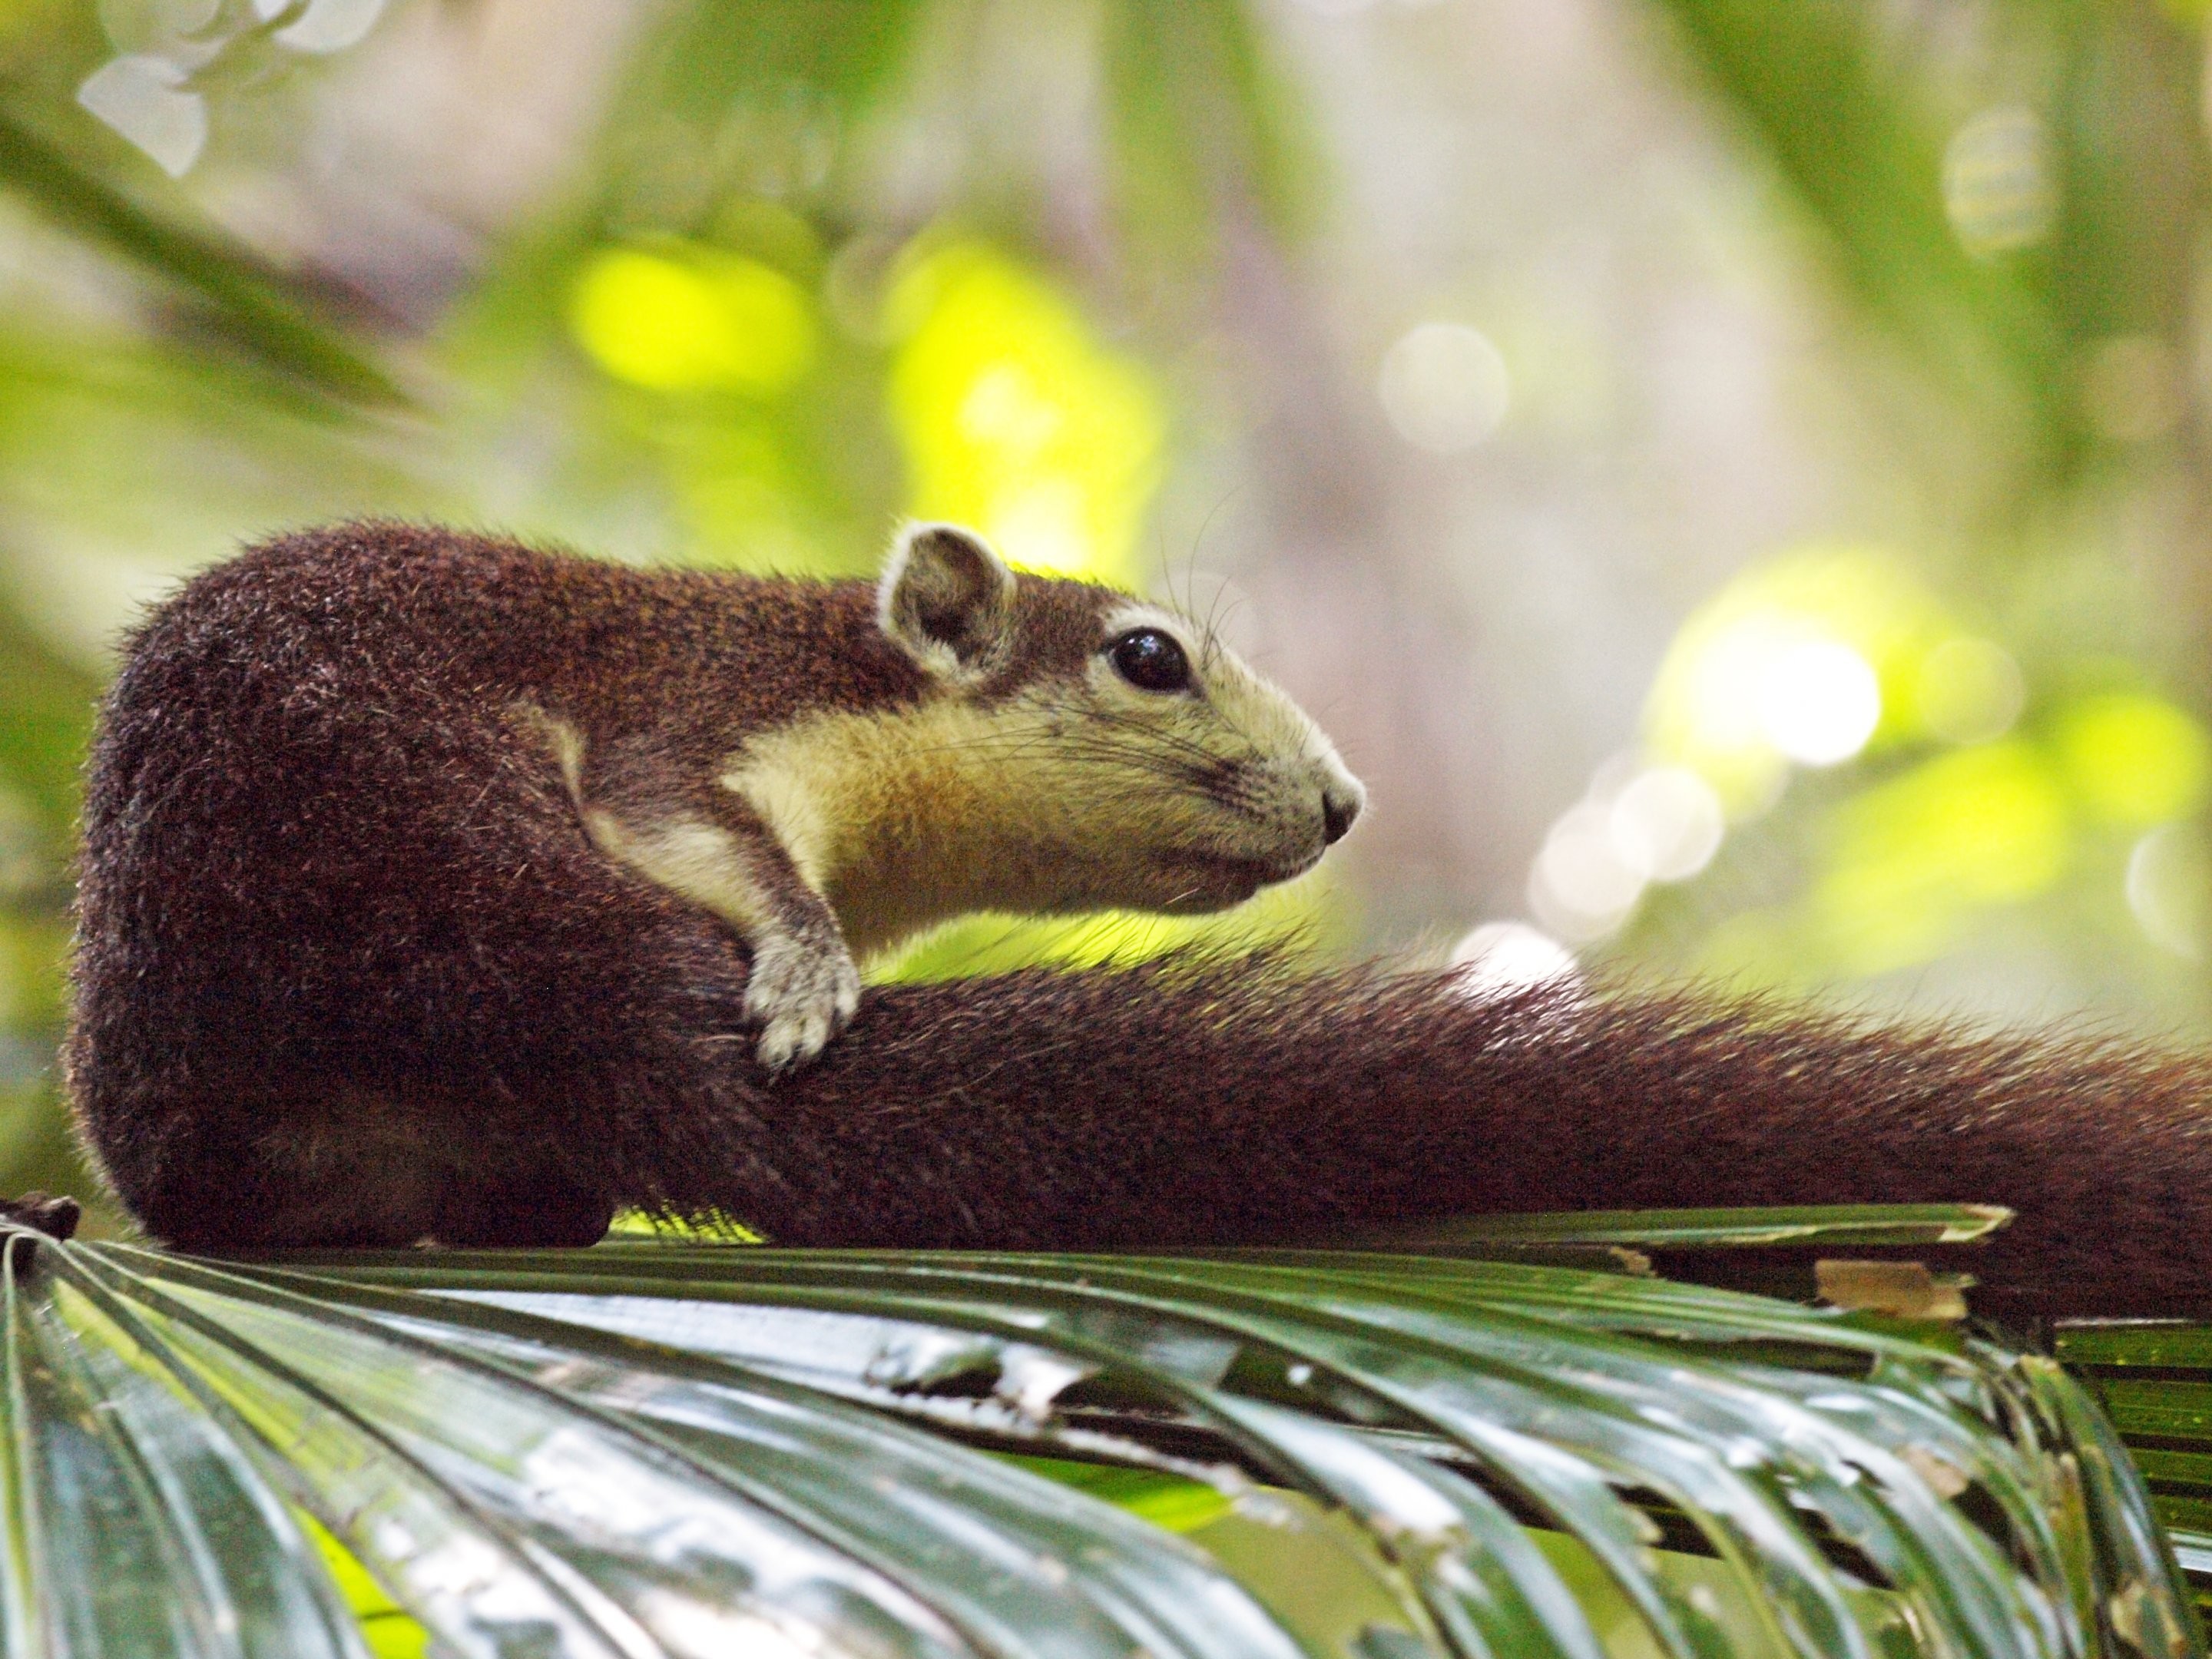 the squirrel in a tree, grooming its tail and looking to the right, blurred forest background 